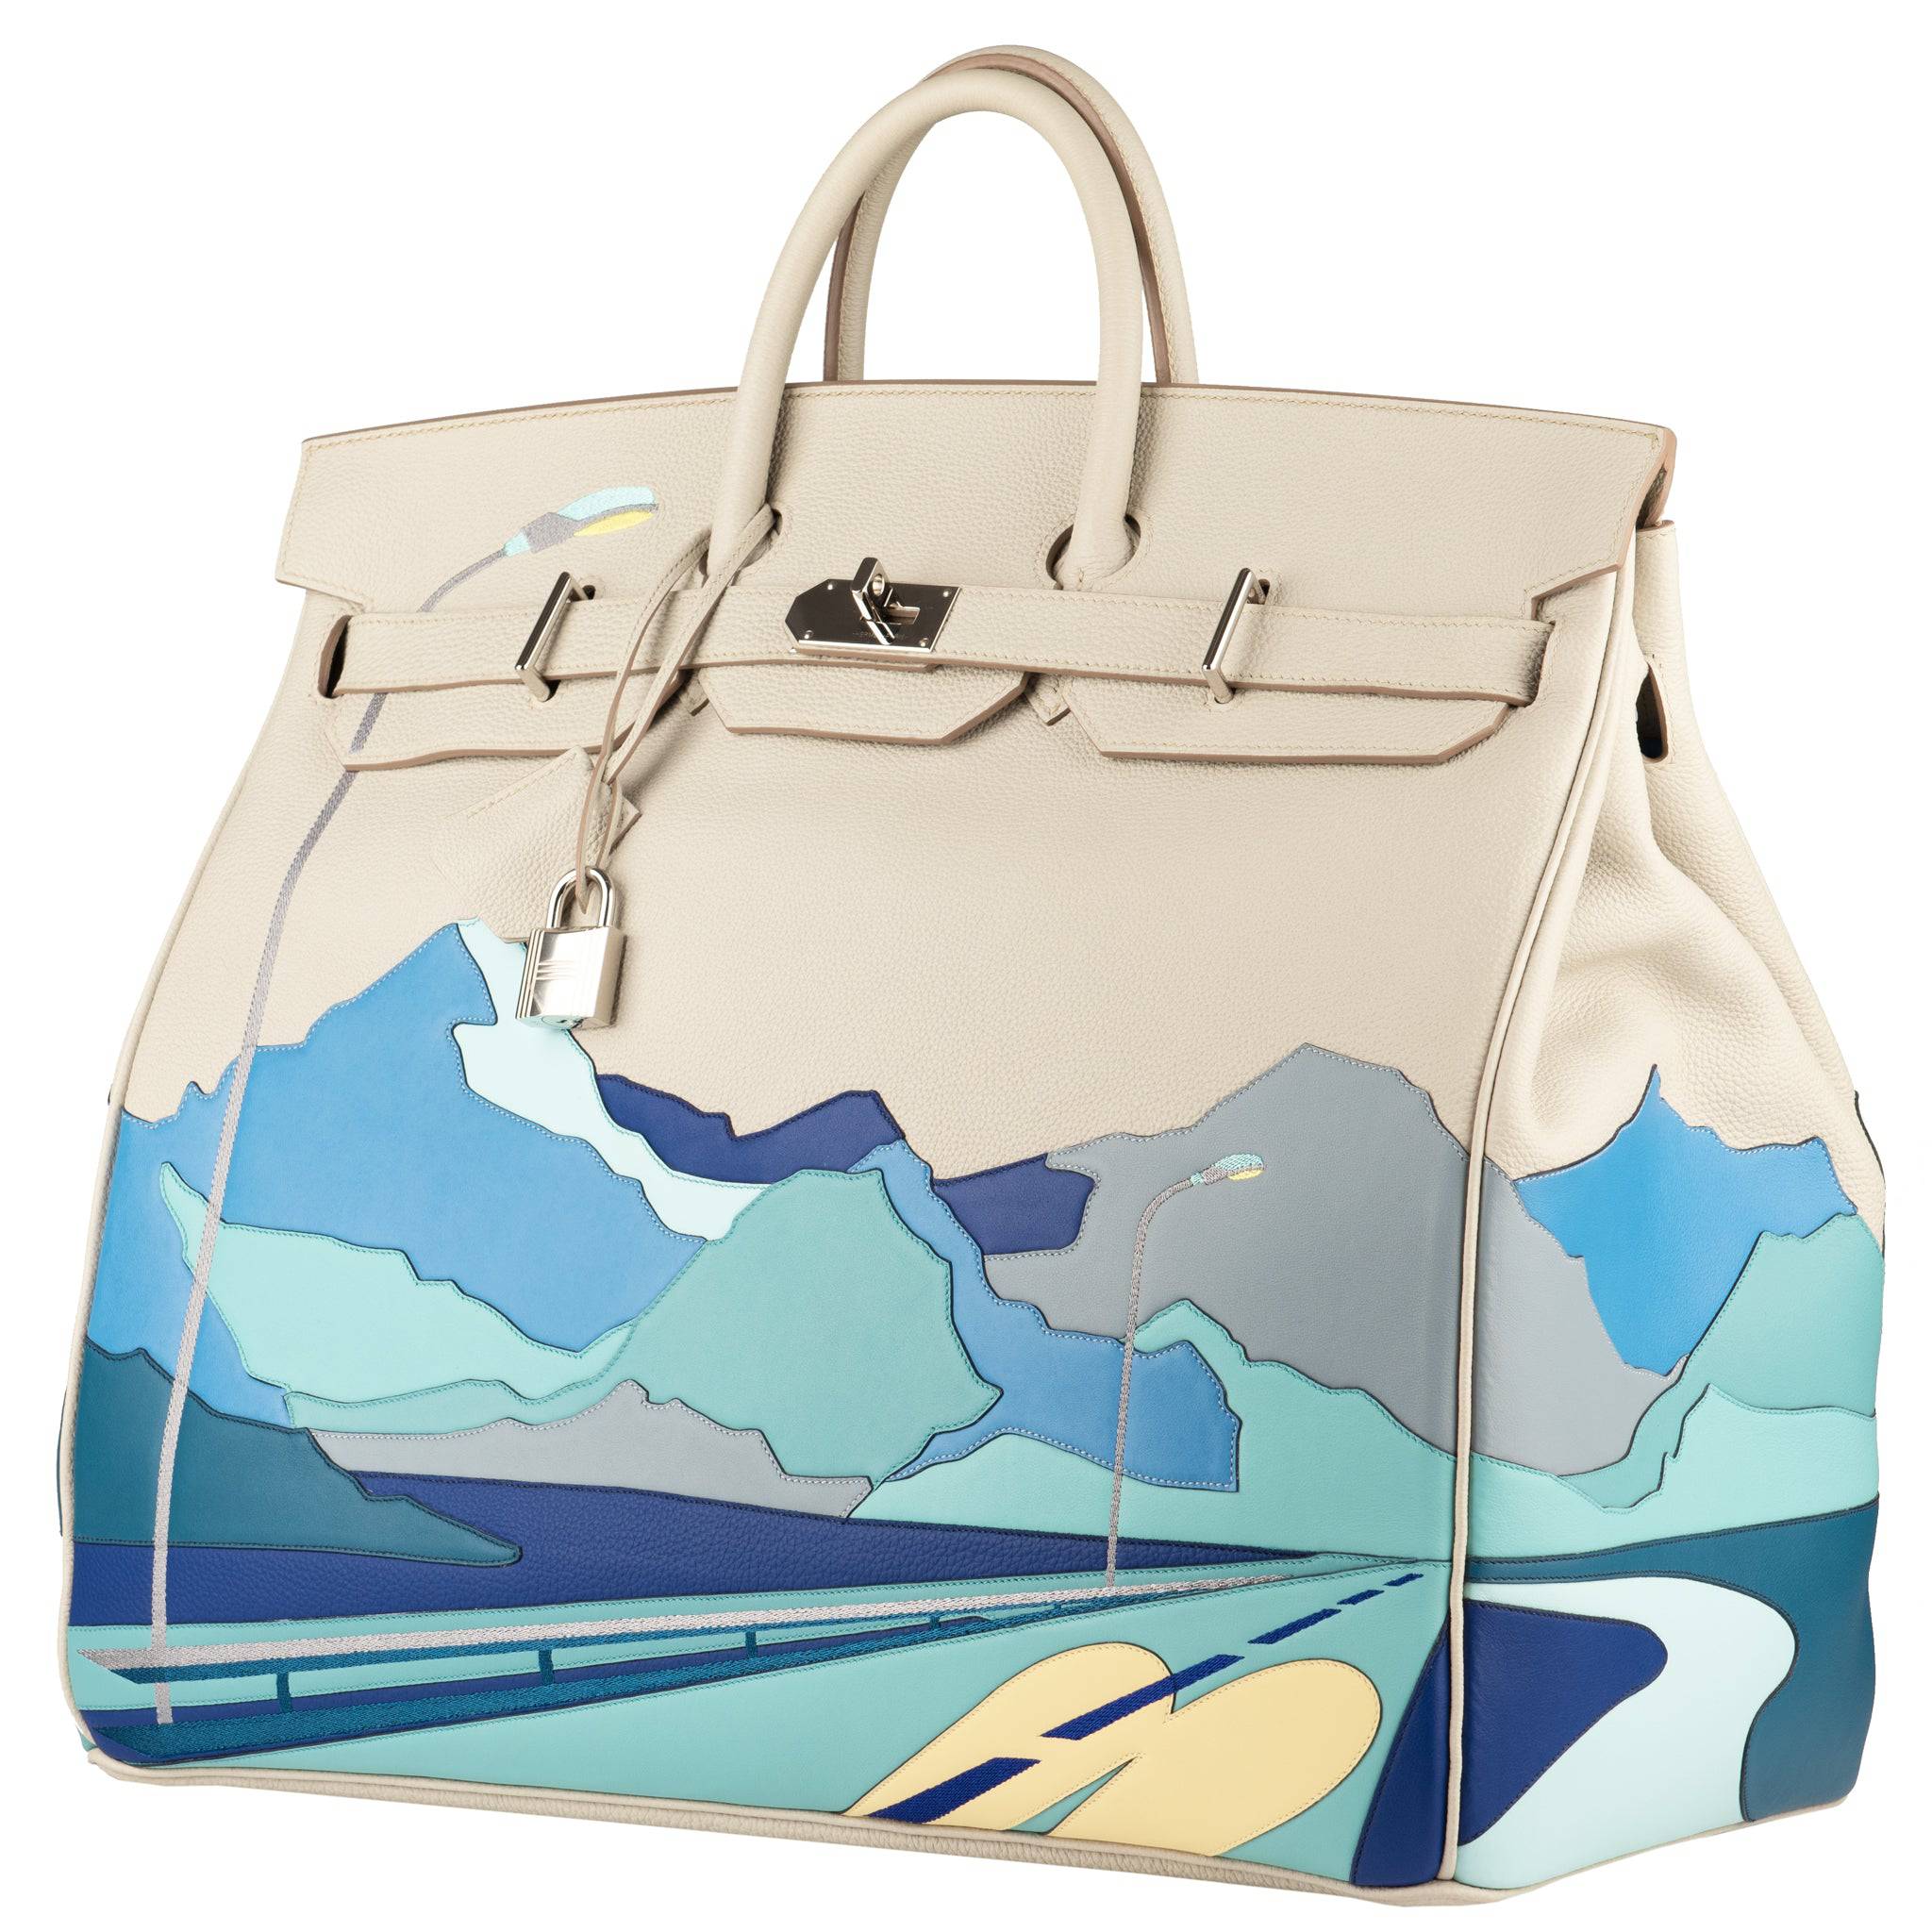 HERMES HAC 50CM LIMITED EDITION ENDLESS ROADS PALLADIUM HARDWARE - On Repeat